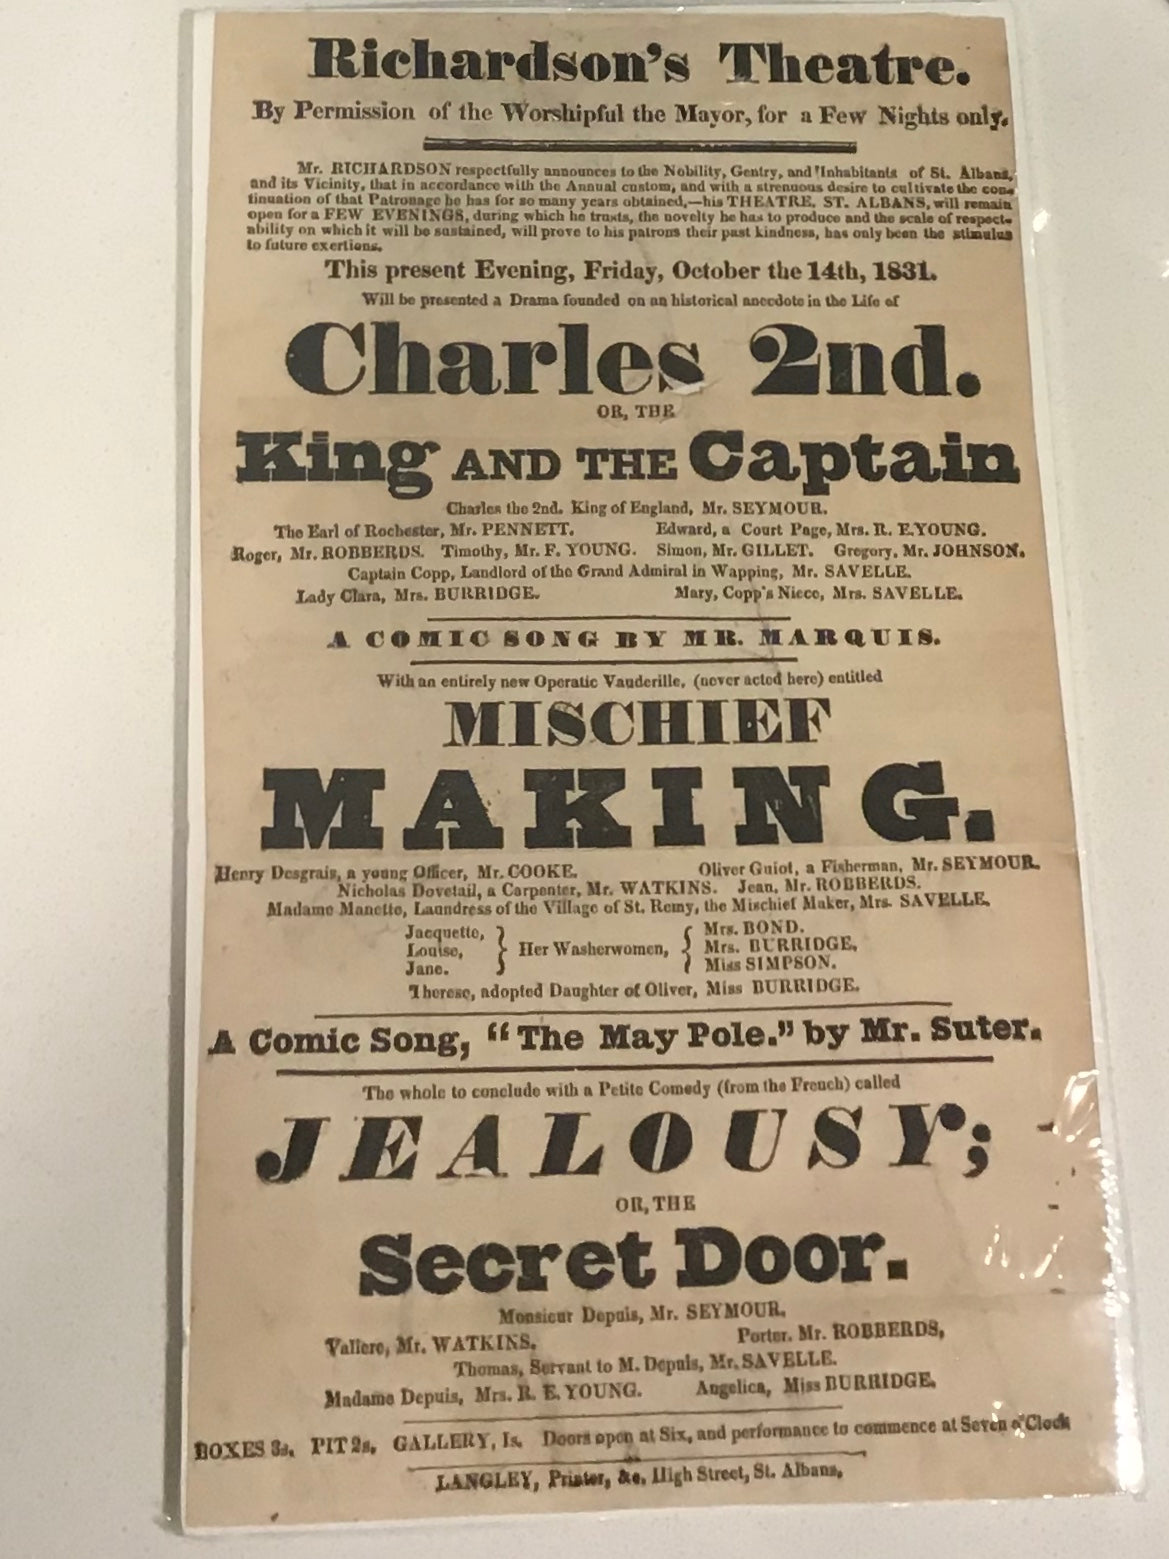 Playbill : Friday October 14th, 1831 - Charles the 2nd or, the King and Cleopatra; Mischief Making; Jealousy or, the Secret Door